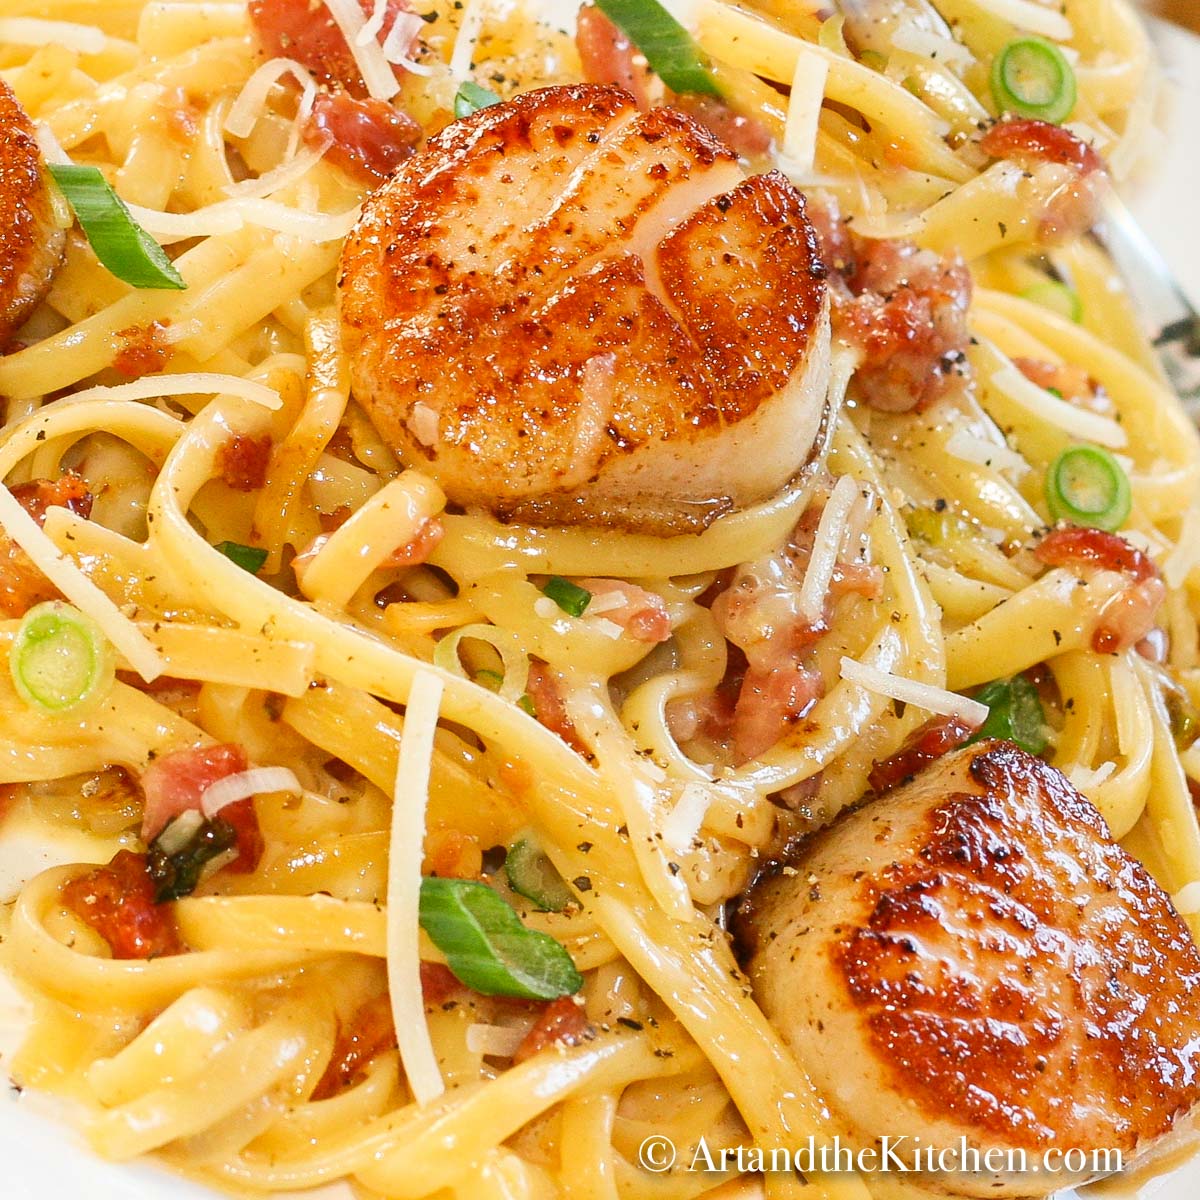 Plate of linguine pasta topped with seared scallops, tossed in carbonara sauce.